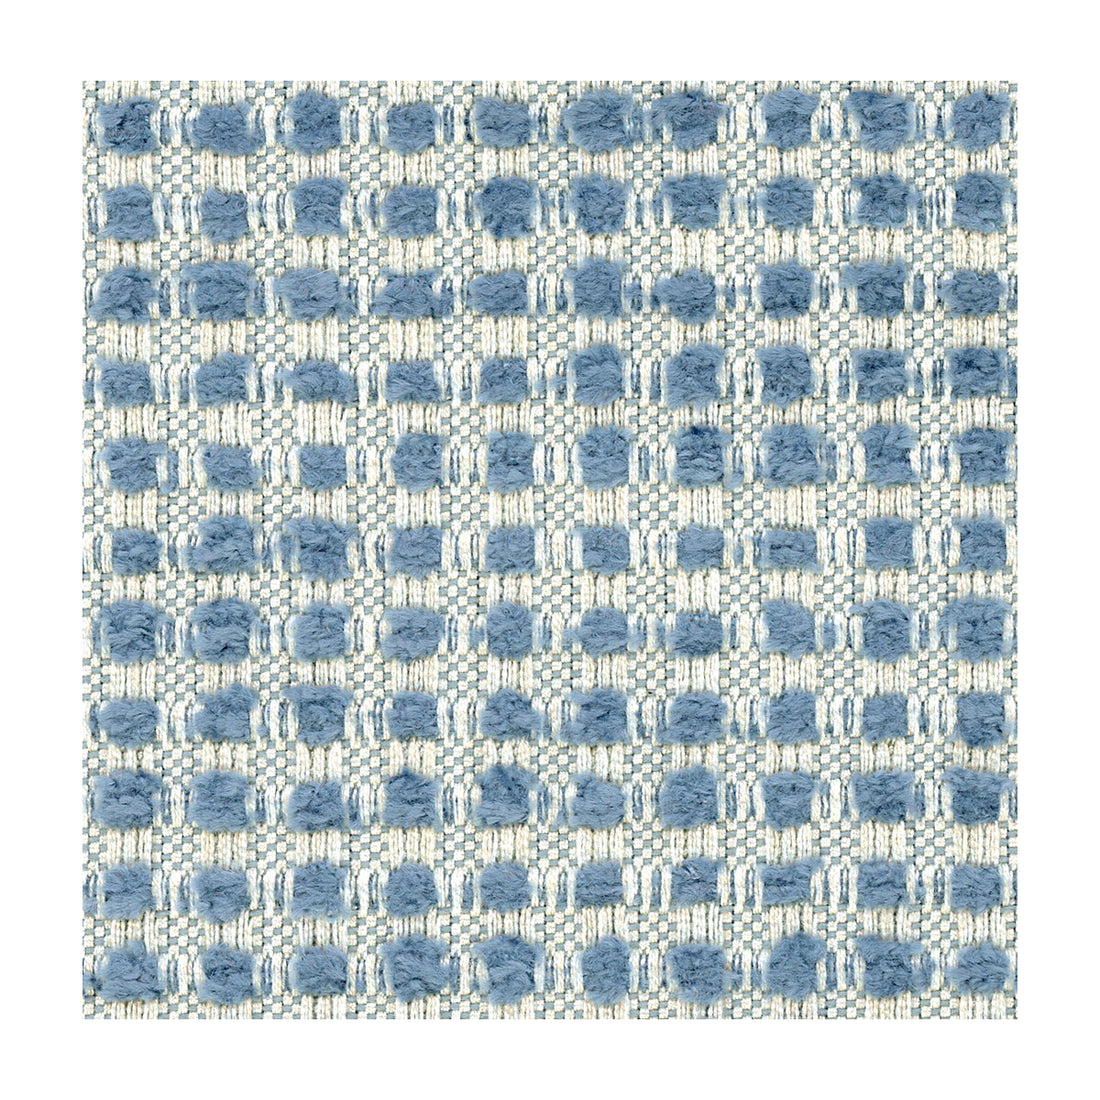 Bubble Tea fabric in blue stone color - pattern 32012.516.0 - by Kravet Design in the Candice Olson collection